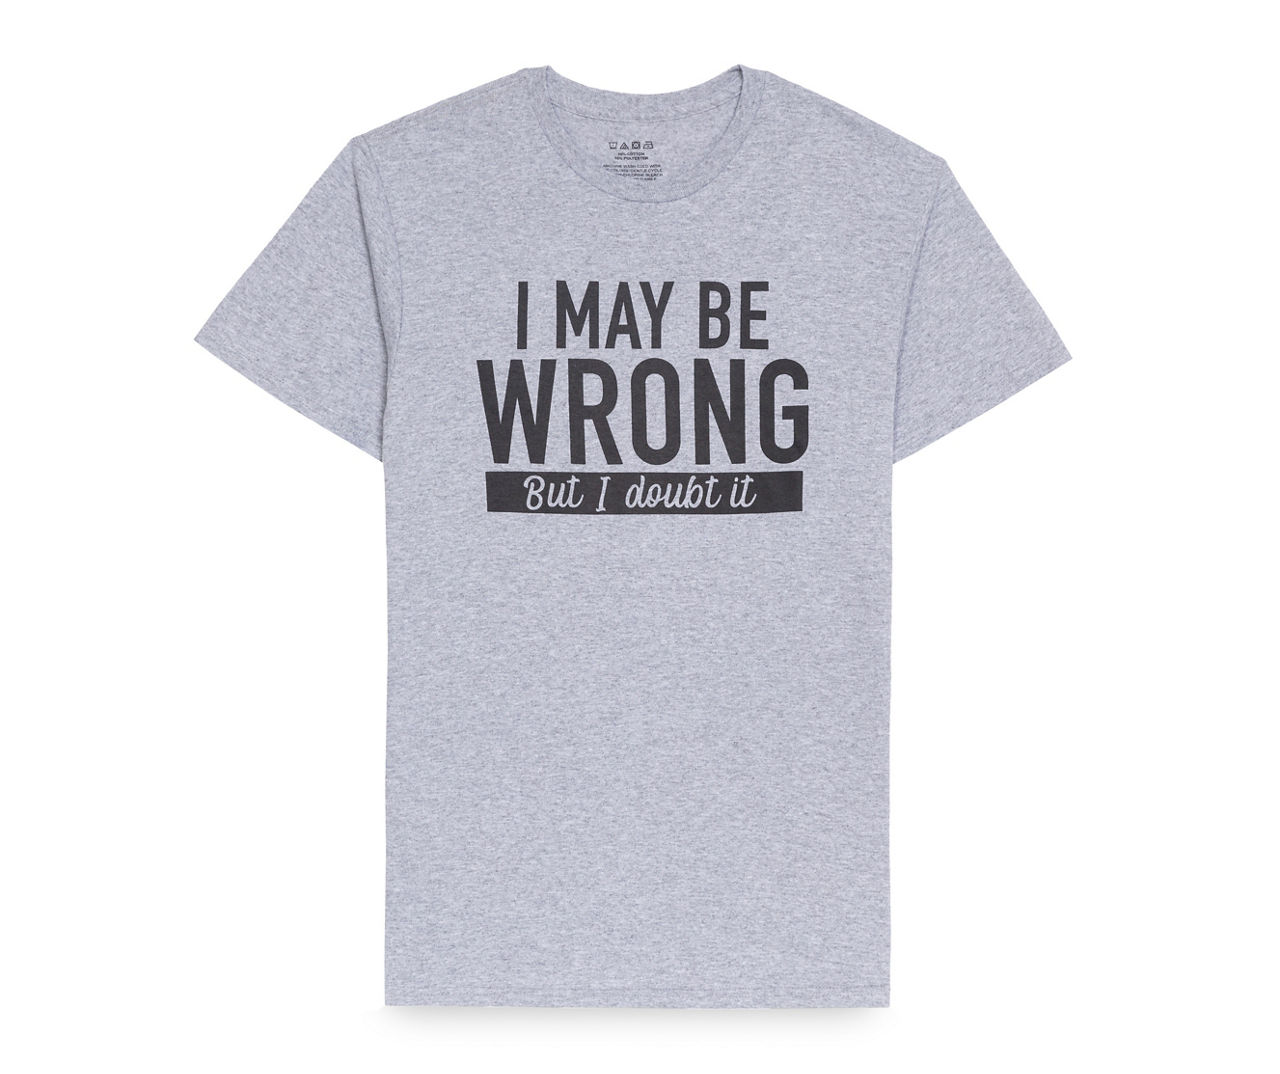 Men's Size XX-Large "I May Be Wrong, But I Doubt It" Heather Gray Graphic Tee